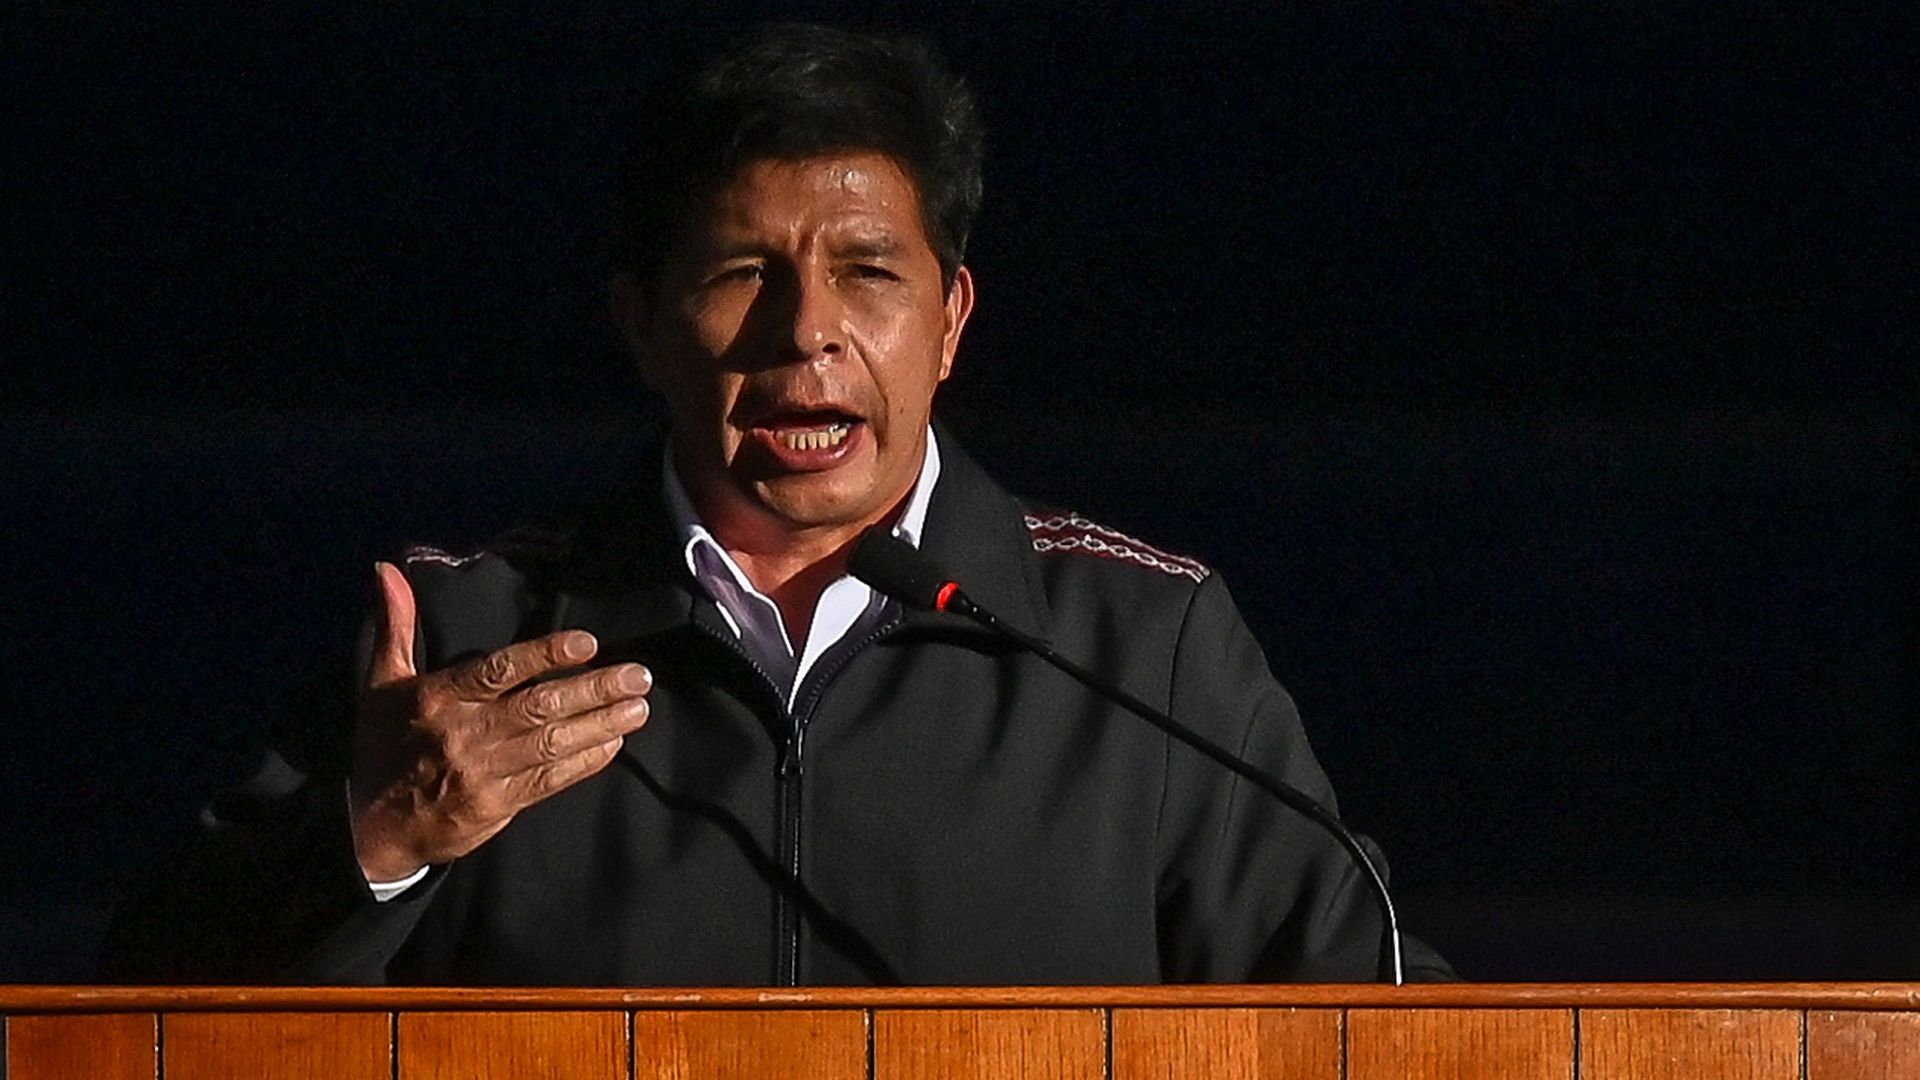 Pedro Castillo, the former President of Peru, speaks during an event in Lima earlier this year.